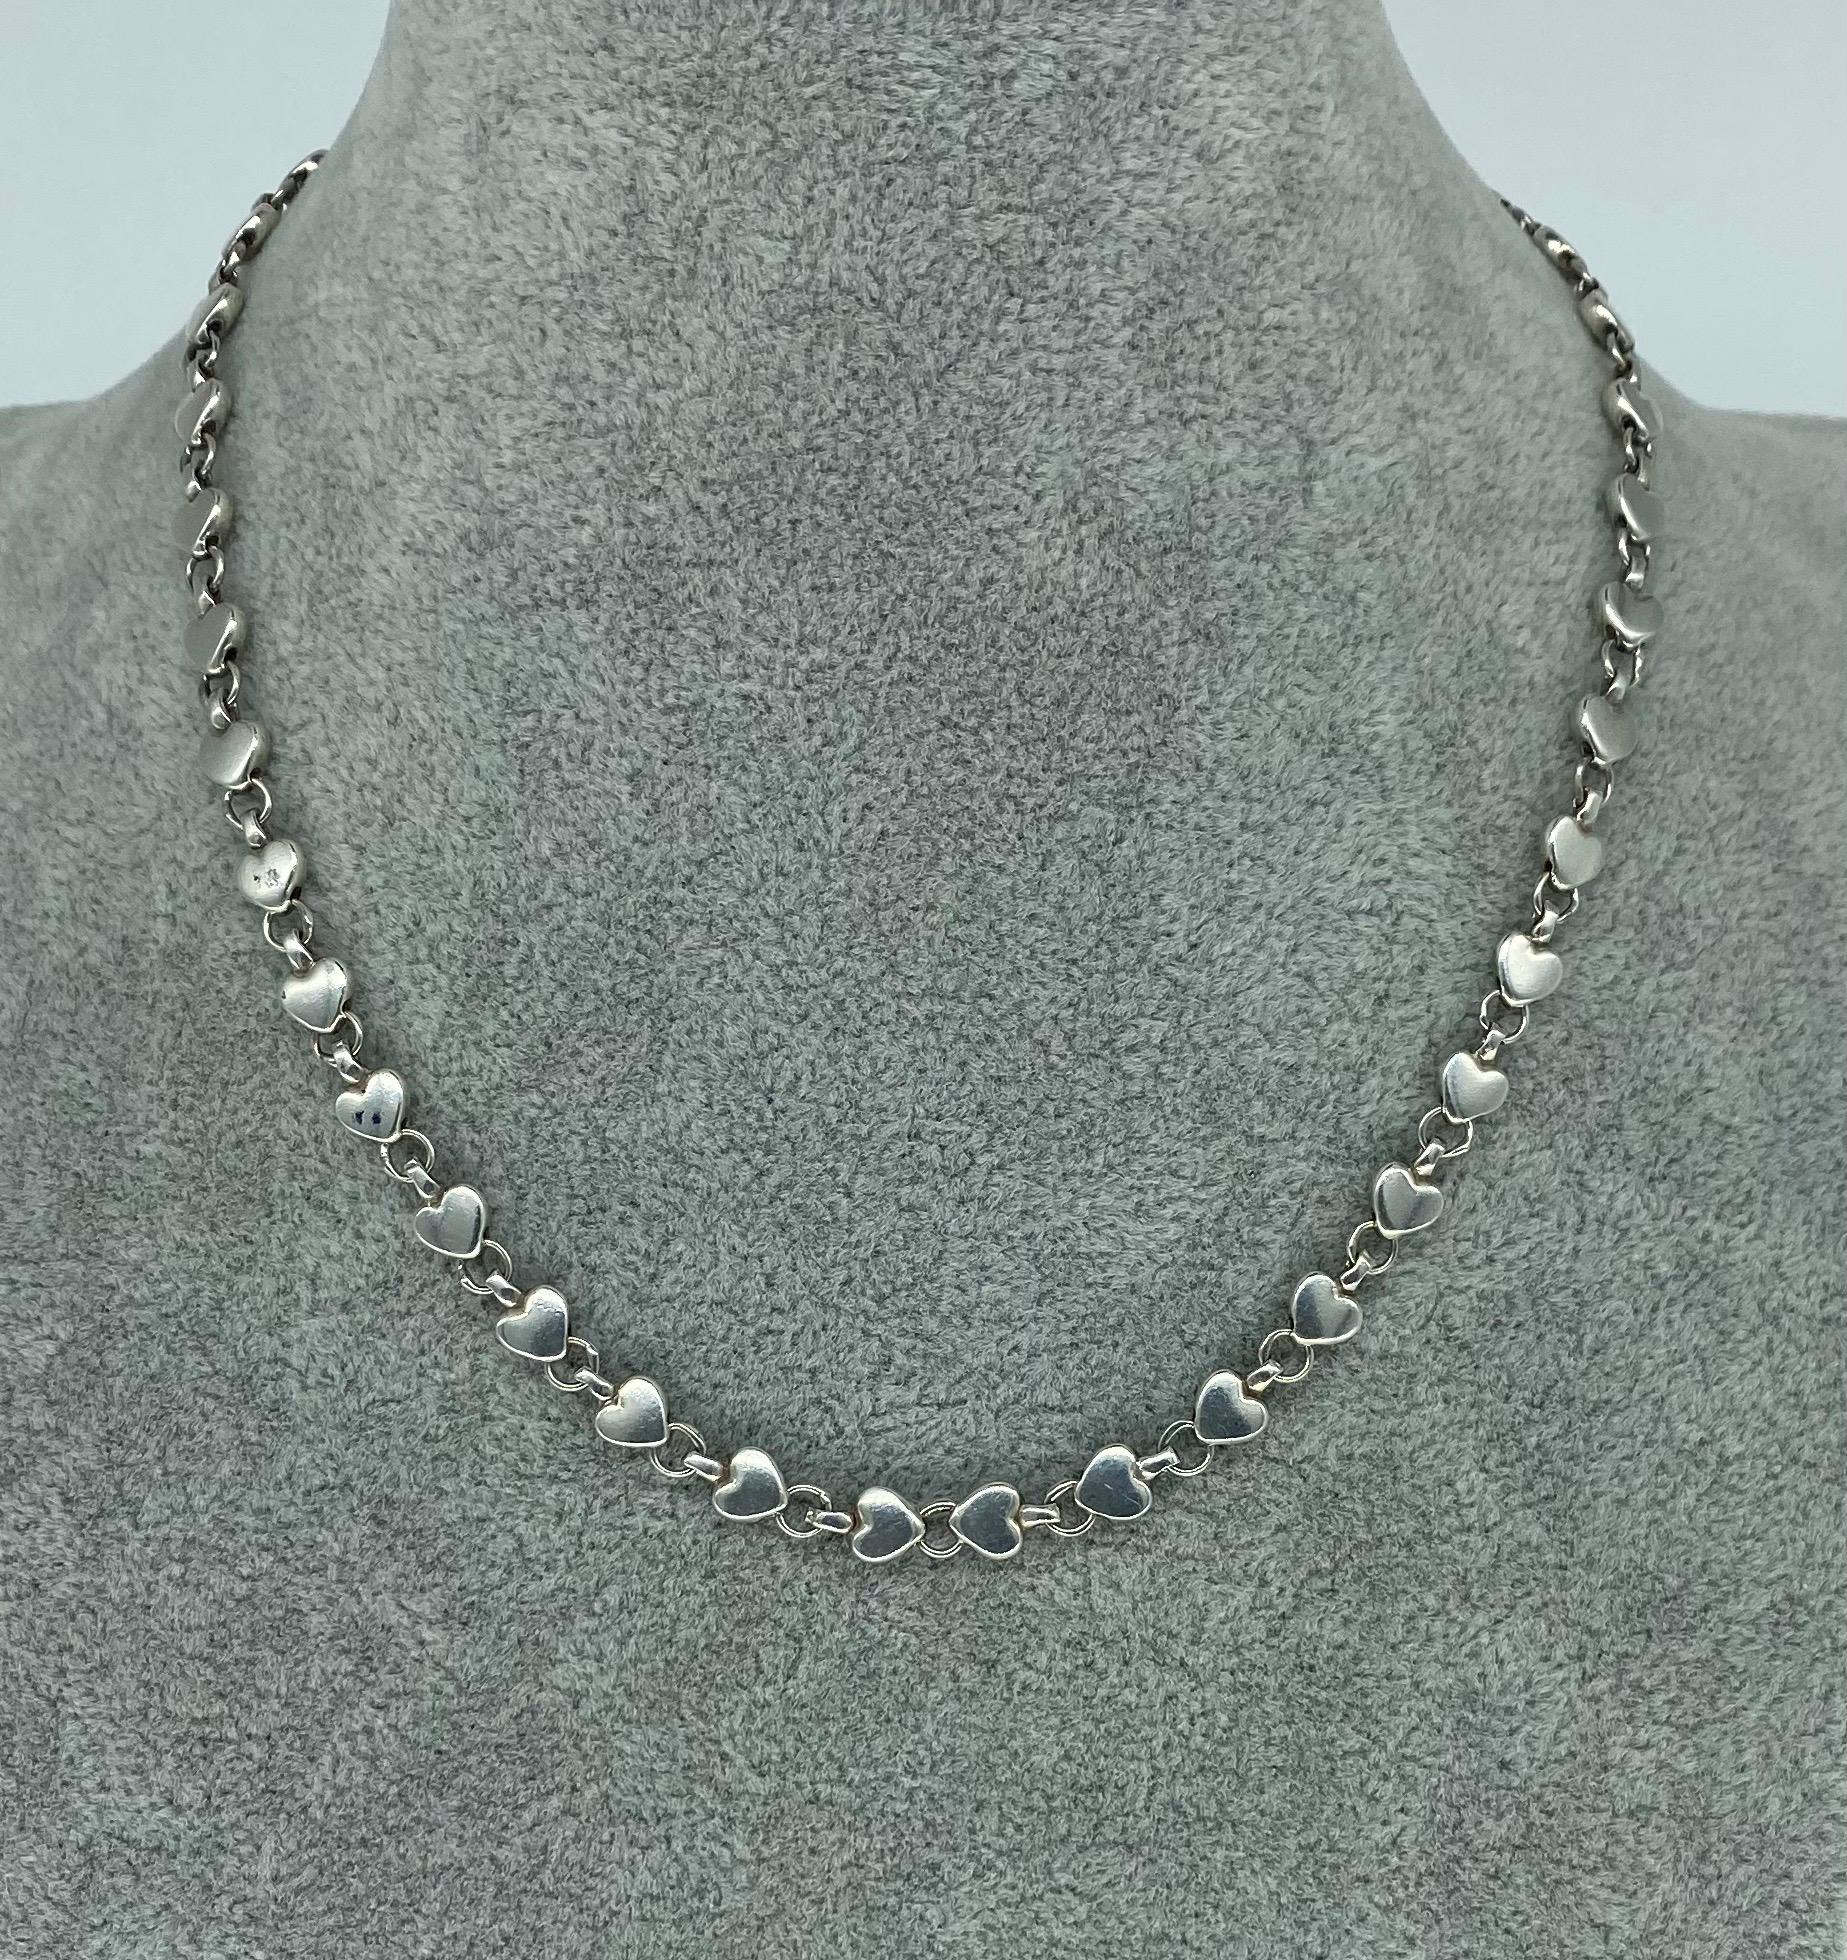 Vintage Tiffany & Co Heart Link Necklace Sterling Silver 925. Beautiful ongoing links of Hearts all over this necklace made by Tiffany & Co.
This necklace is 100% authentic Tiffany & co necklace. No original box/papers. The necklace measures 16